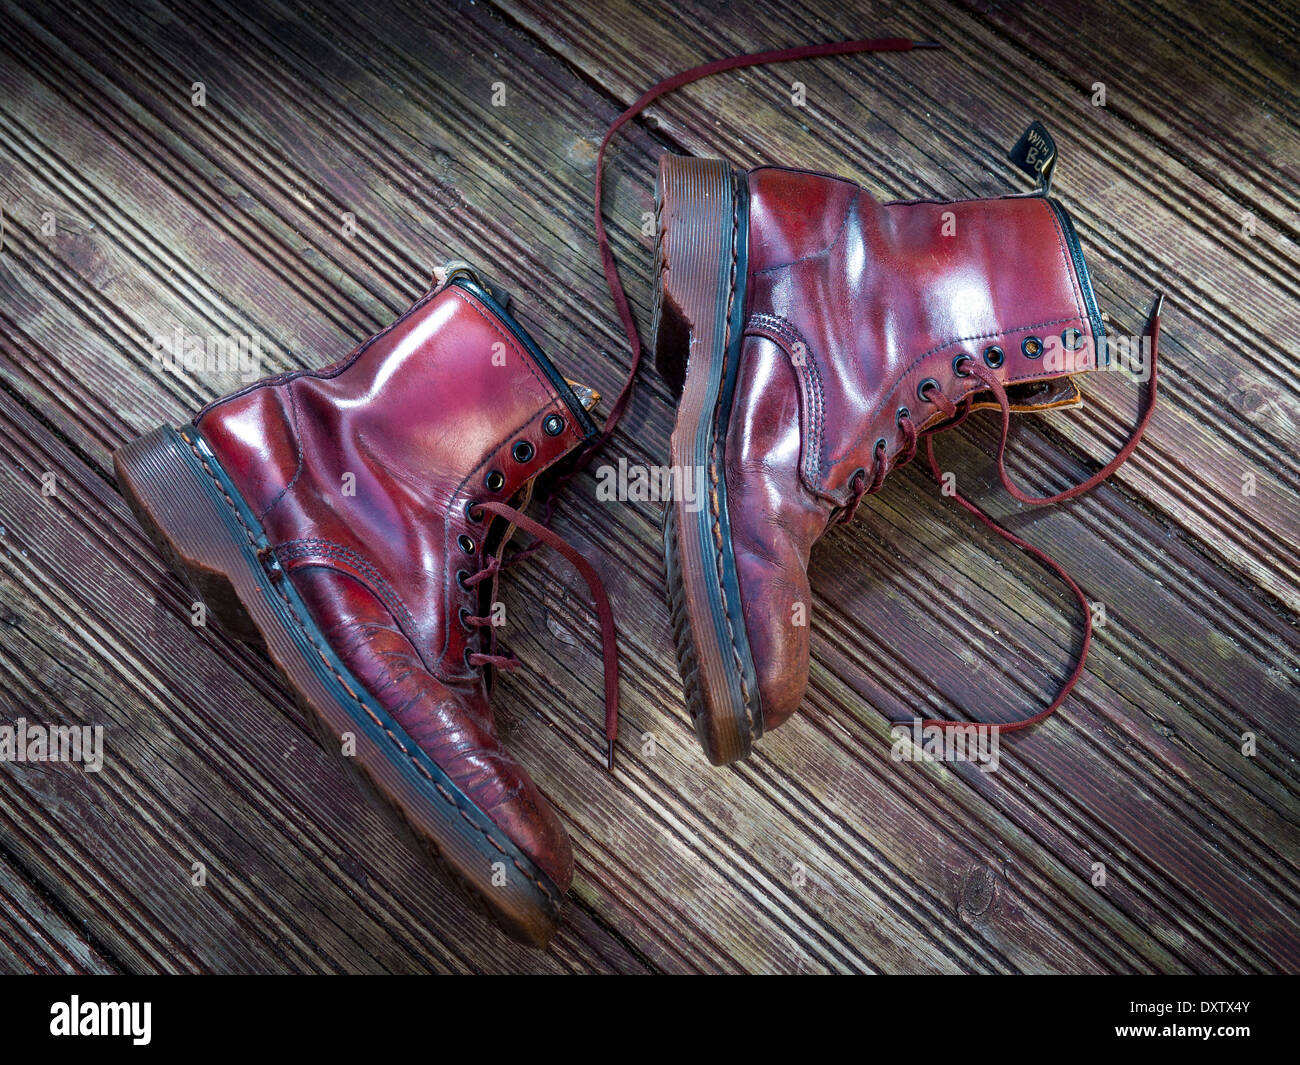 Dr Martens Leather Lace up Boots. Stock Photo